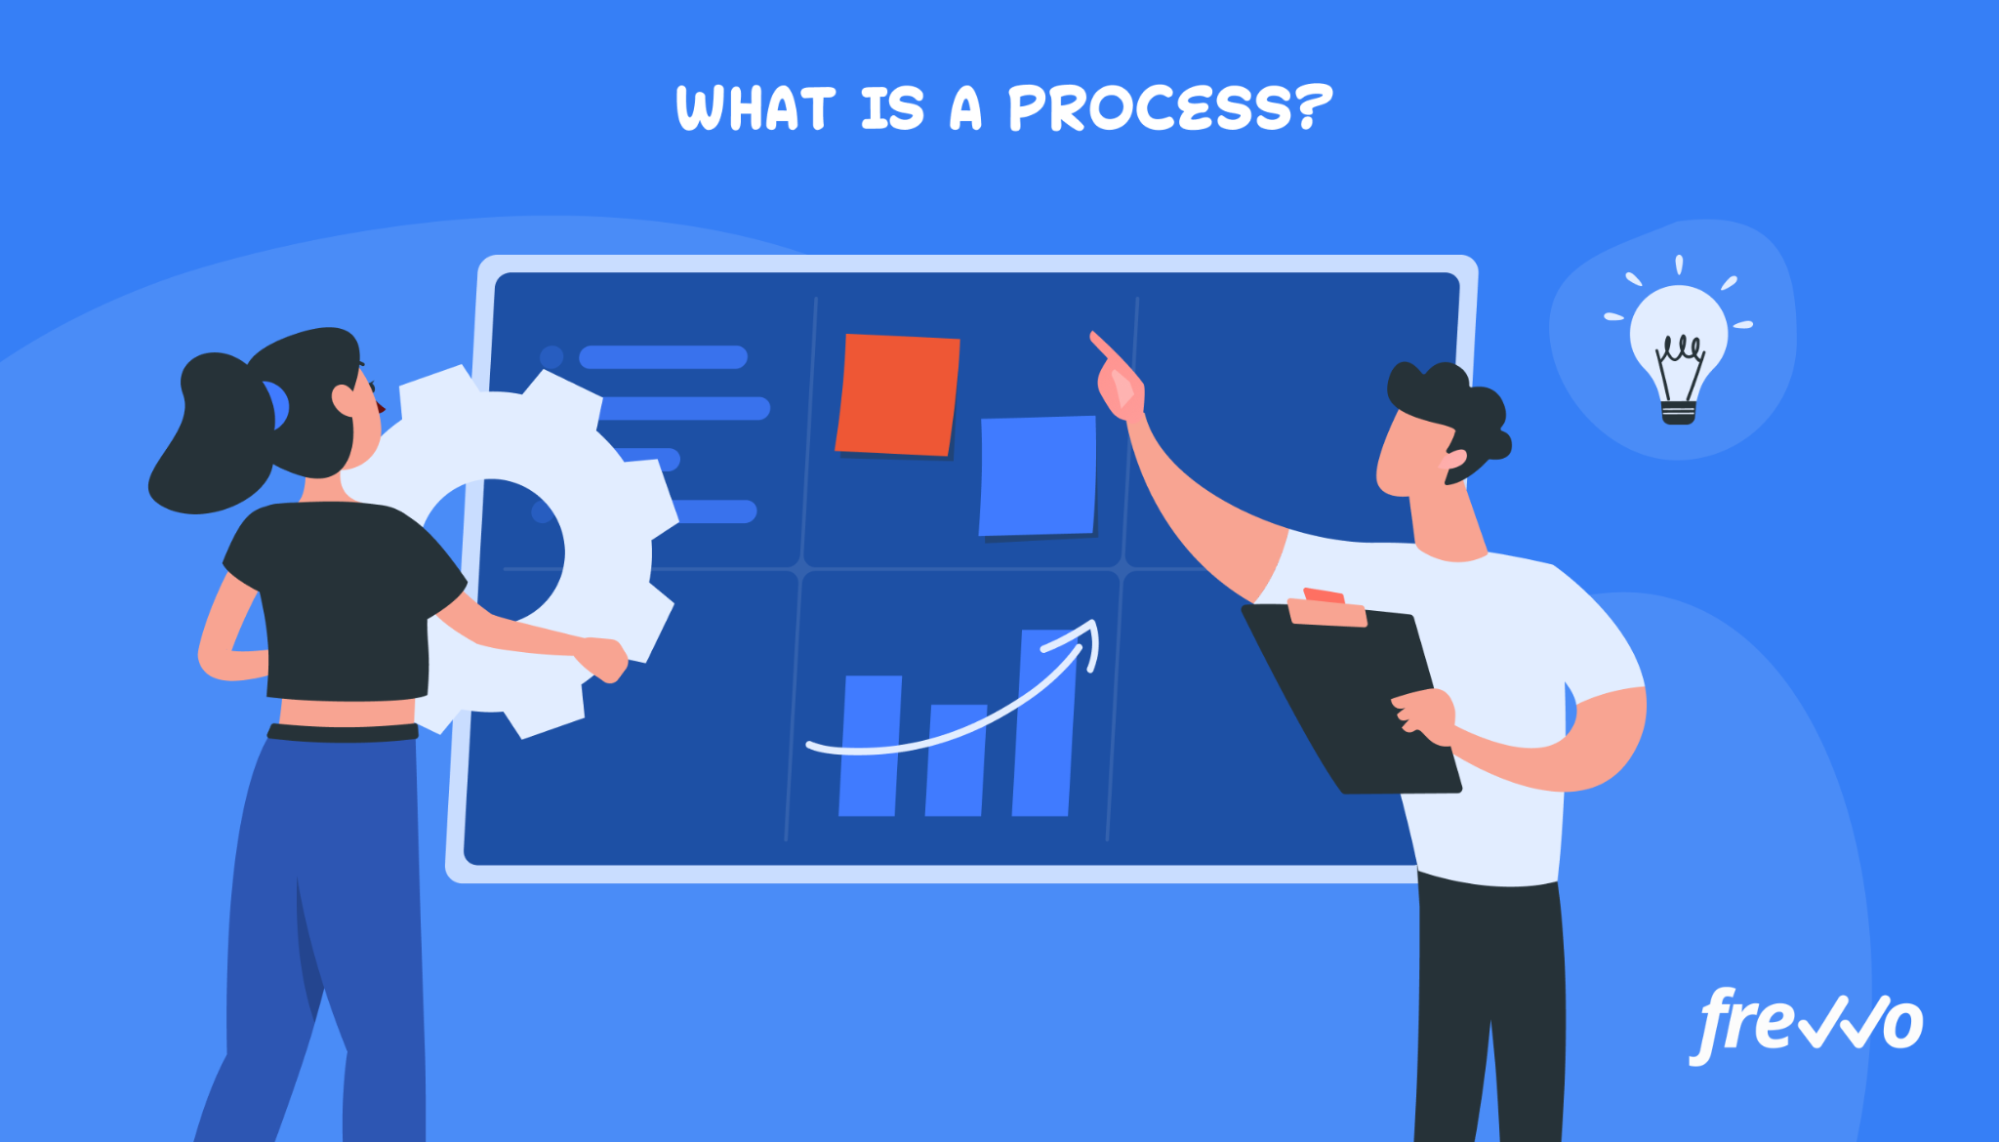 What Is a Process?